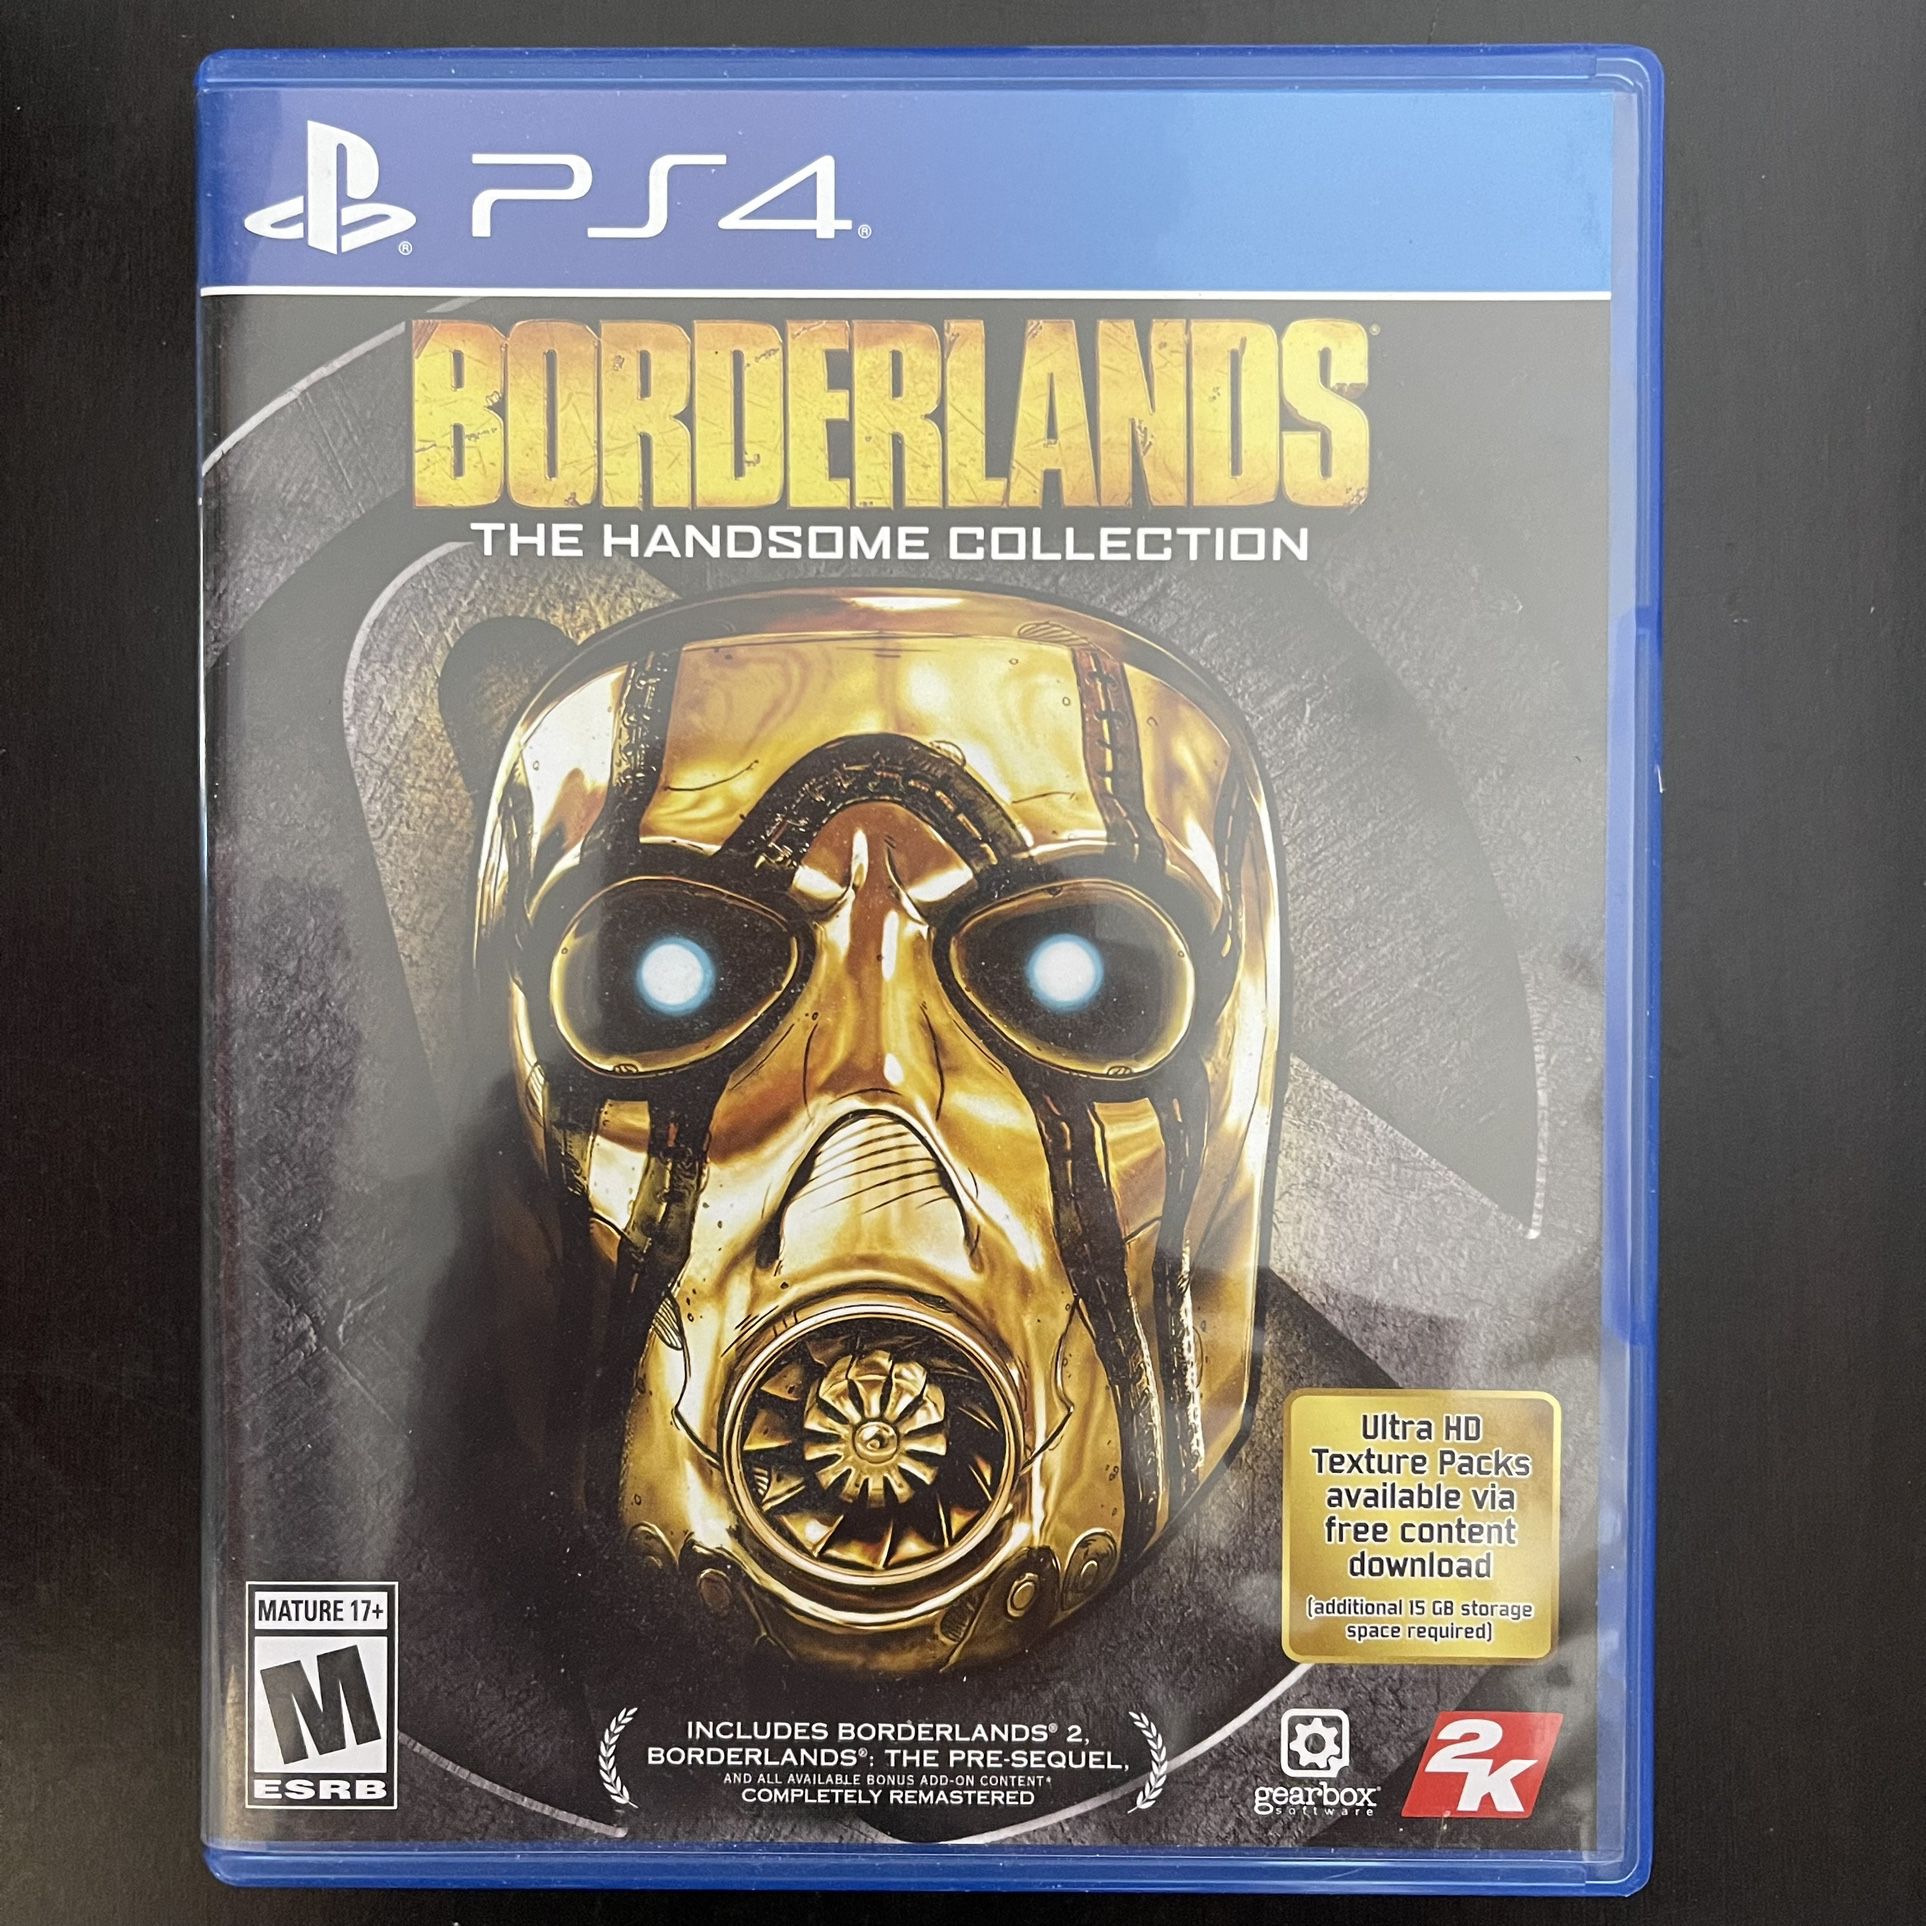 Borderlands: The Handsome Collection - PS4 - New (opened)